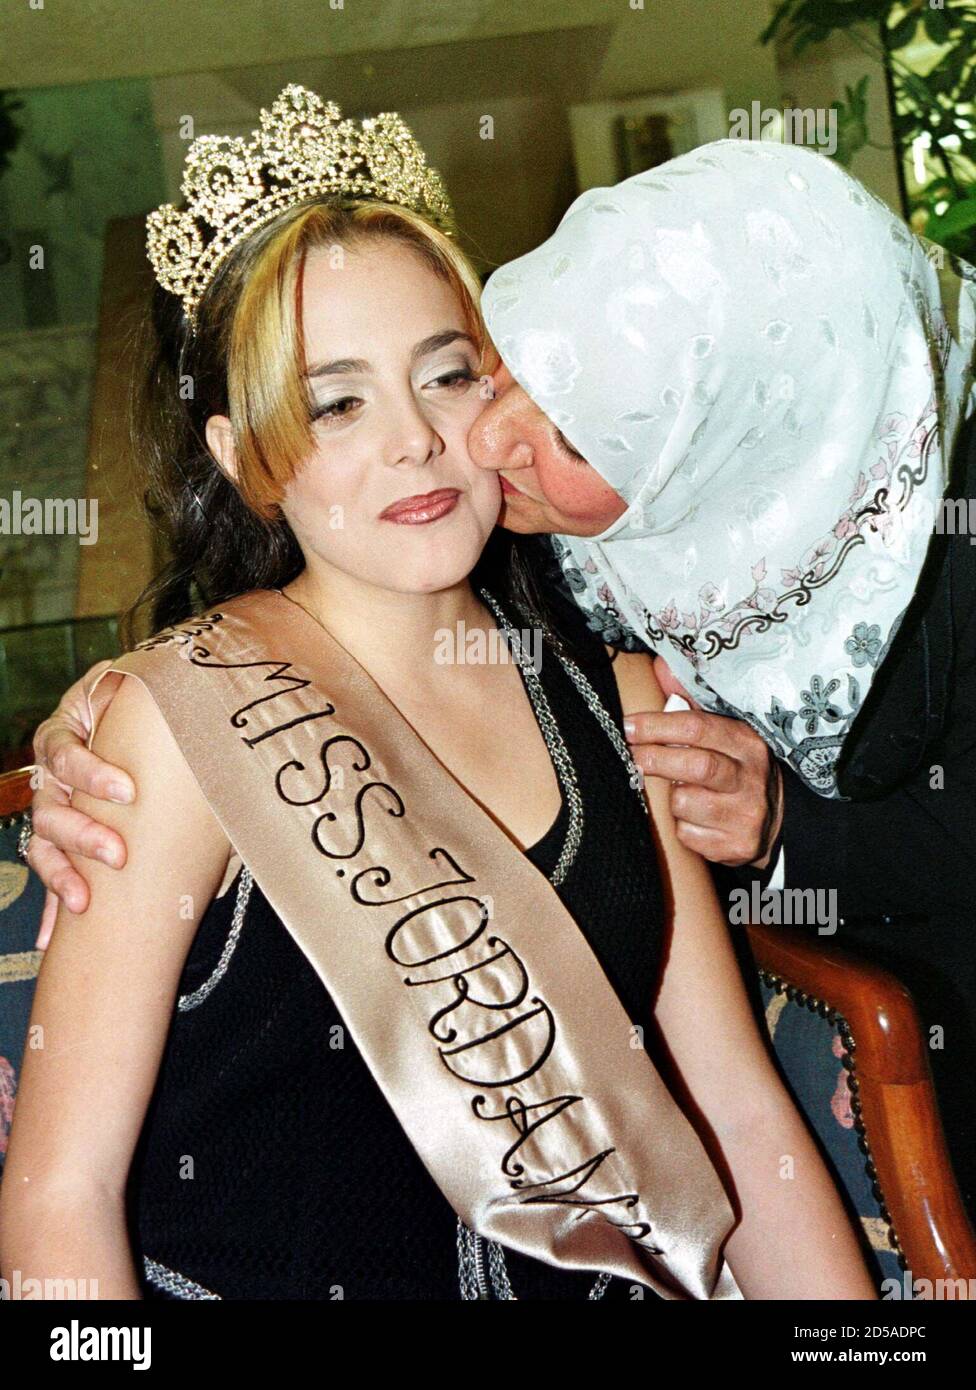 Sixteen-year-old Malak Khabon is embraced by a relative after winning the  Miss Jordan '99 contest in Amman October 29. For the first time since 1965,  a beauty contest to choose Miss Jordan